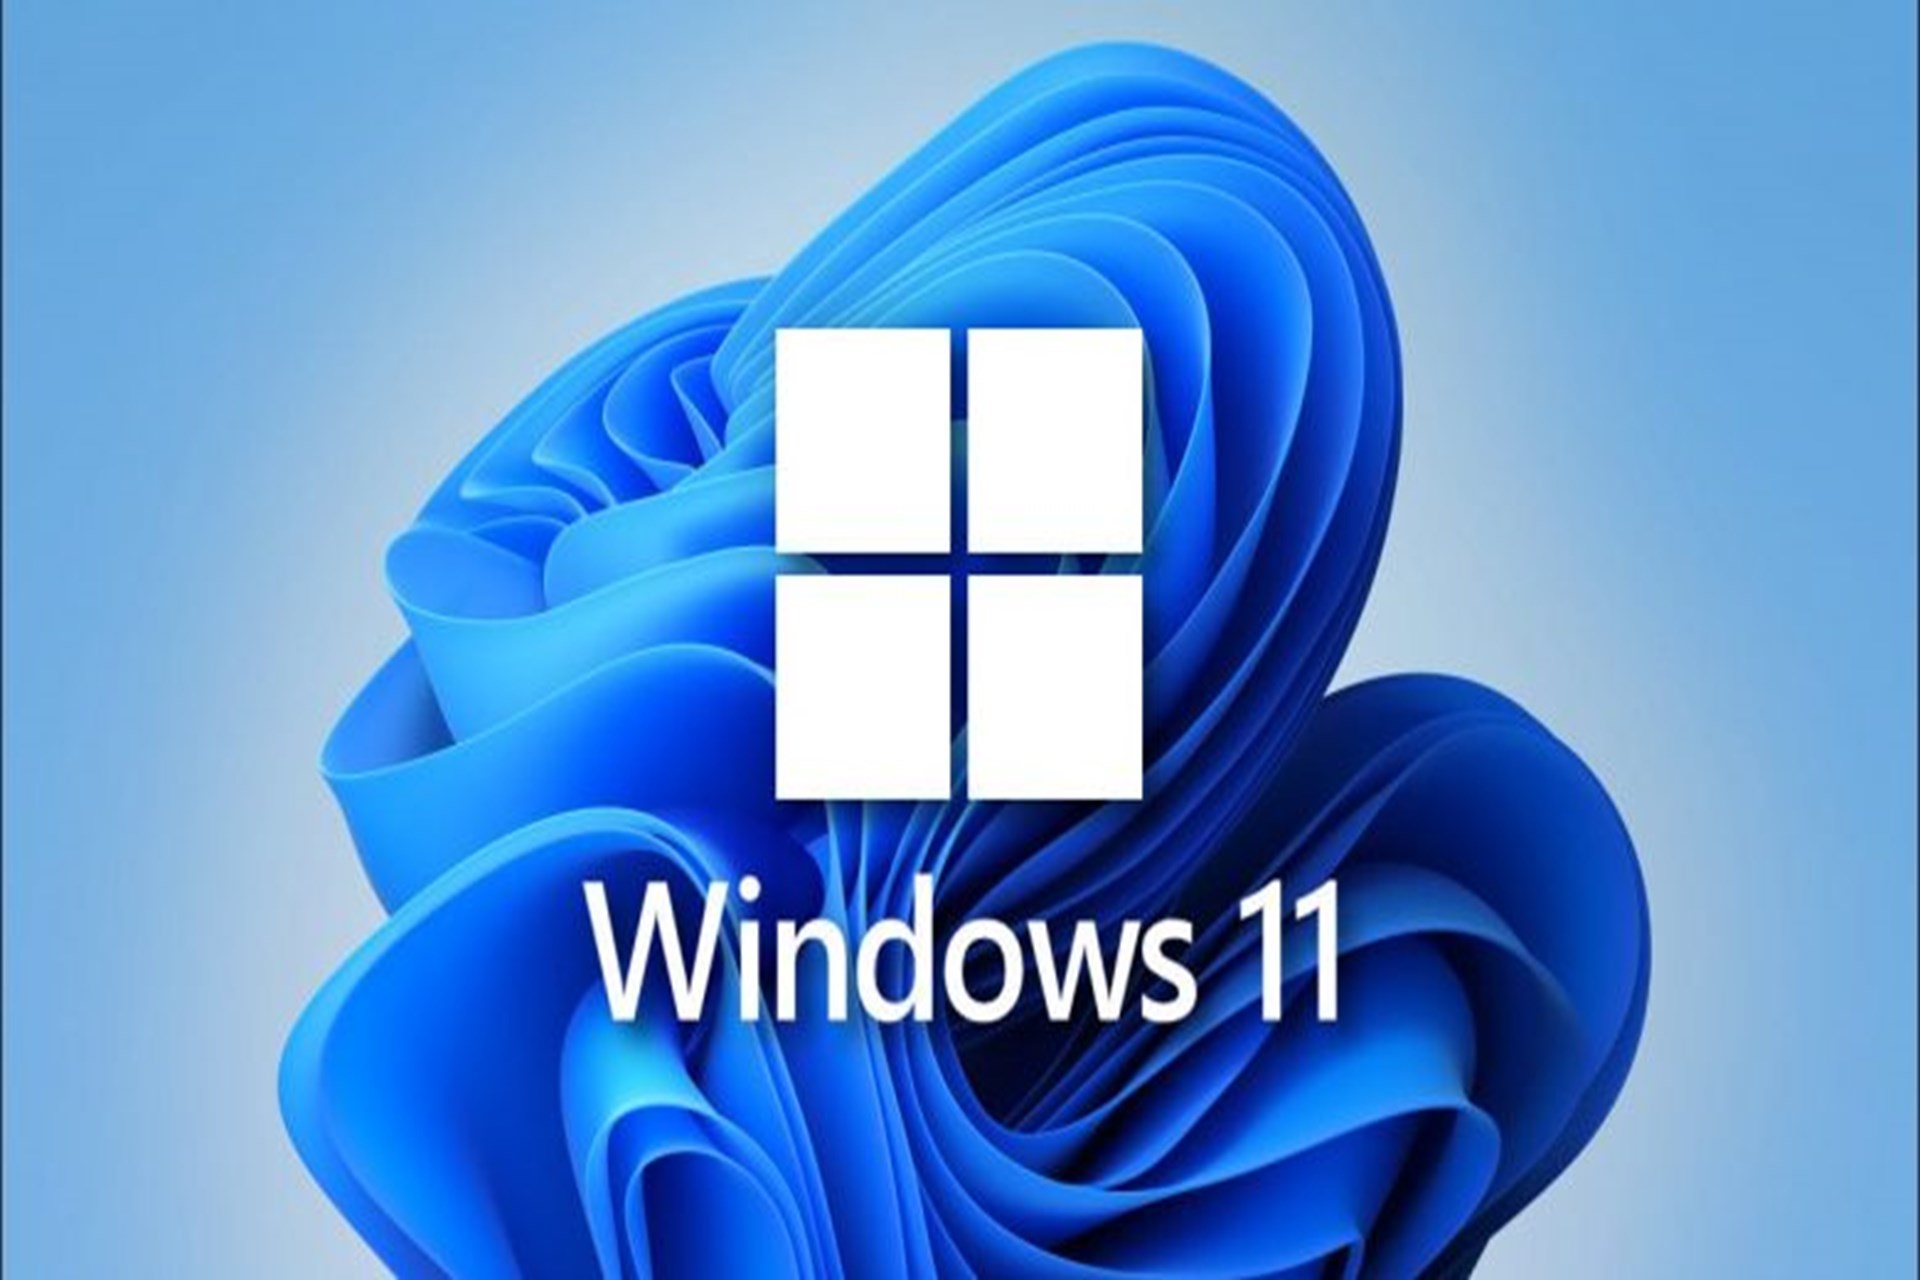 Good is windows 11 The real